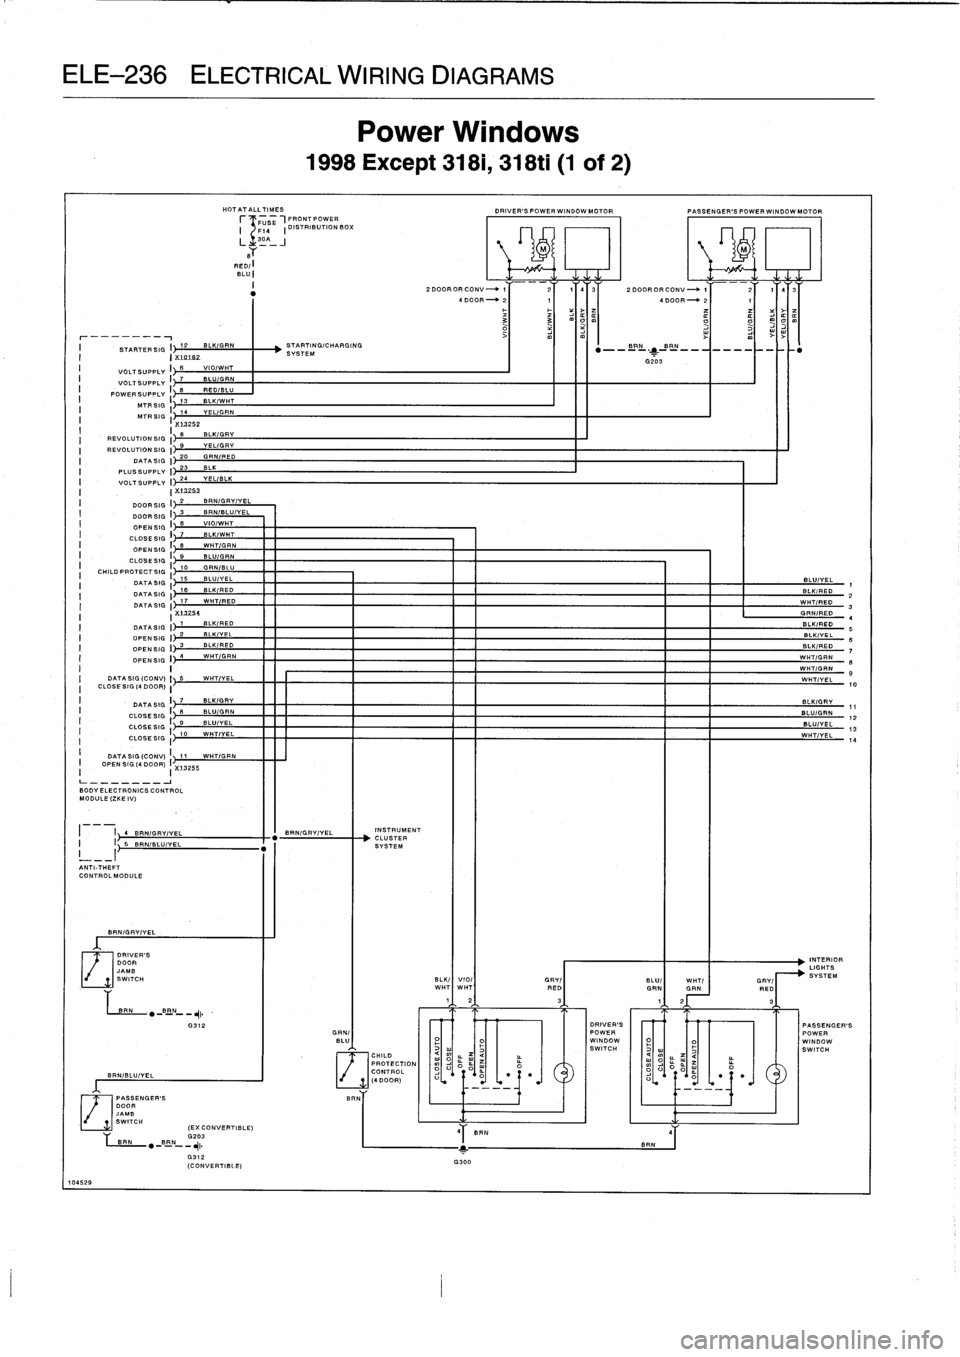 BMW 318i 1997 E36 Repair Manual 
ELE-236
ELECTRICAL
WIRING
DIAGRAMS

HOTATALLTIMES
f
-
-T
USE
-1FRONTPOWER
F14

	

I
DISTRIBUTION
BOX

RED/
:
BLU
:

I

	

STARTERSIG
I
12

	

BLKIGRN

	

STARTING/CHARGING
I

	

I
X
10182

	

SYSTEM
